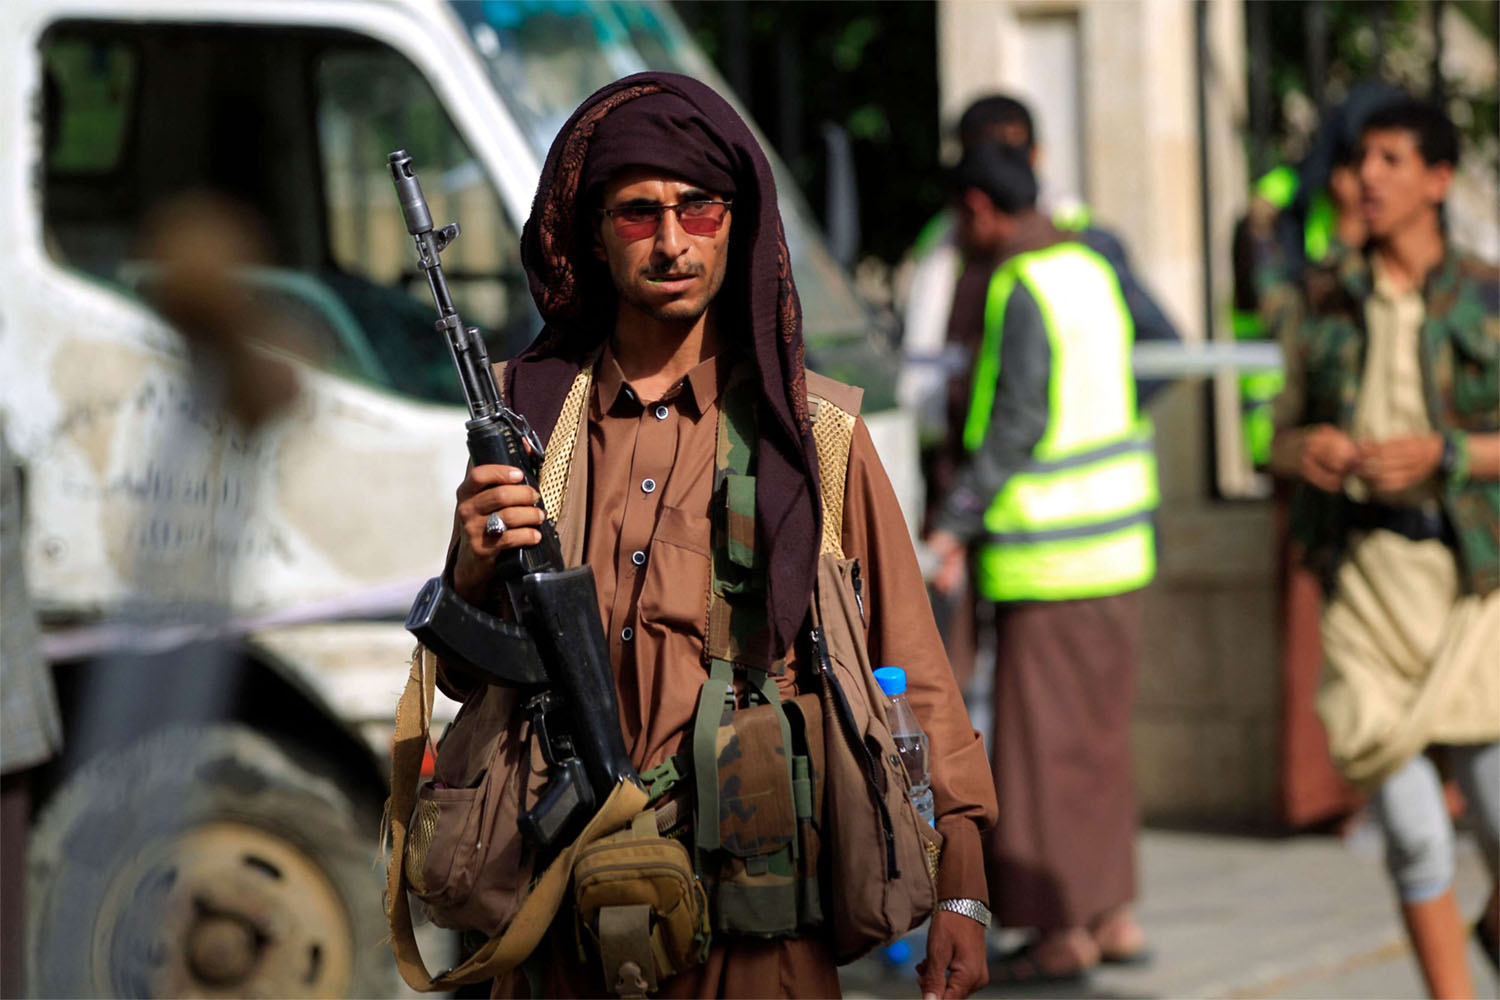 The Houthi rebels control Sanaa and most of northern Yemen